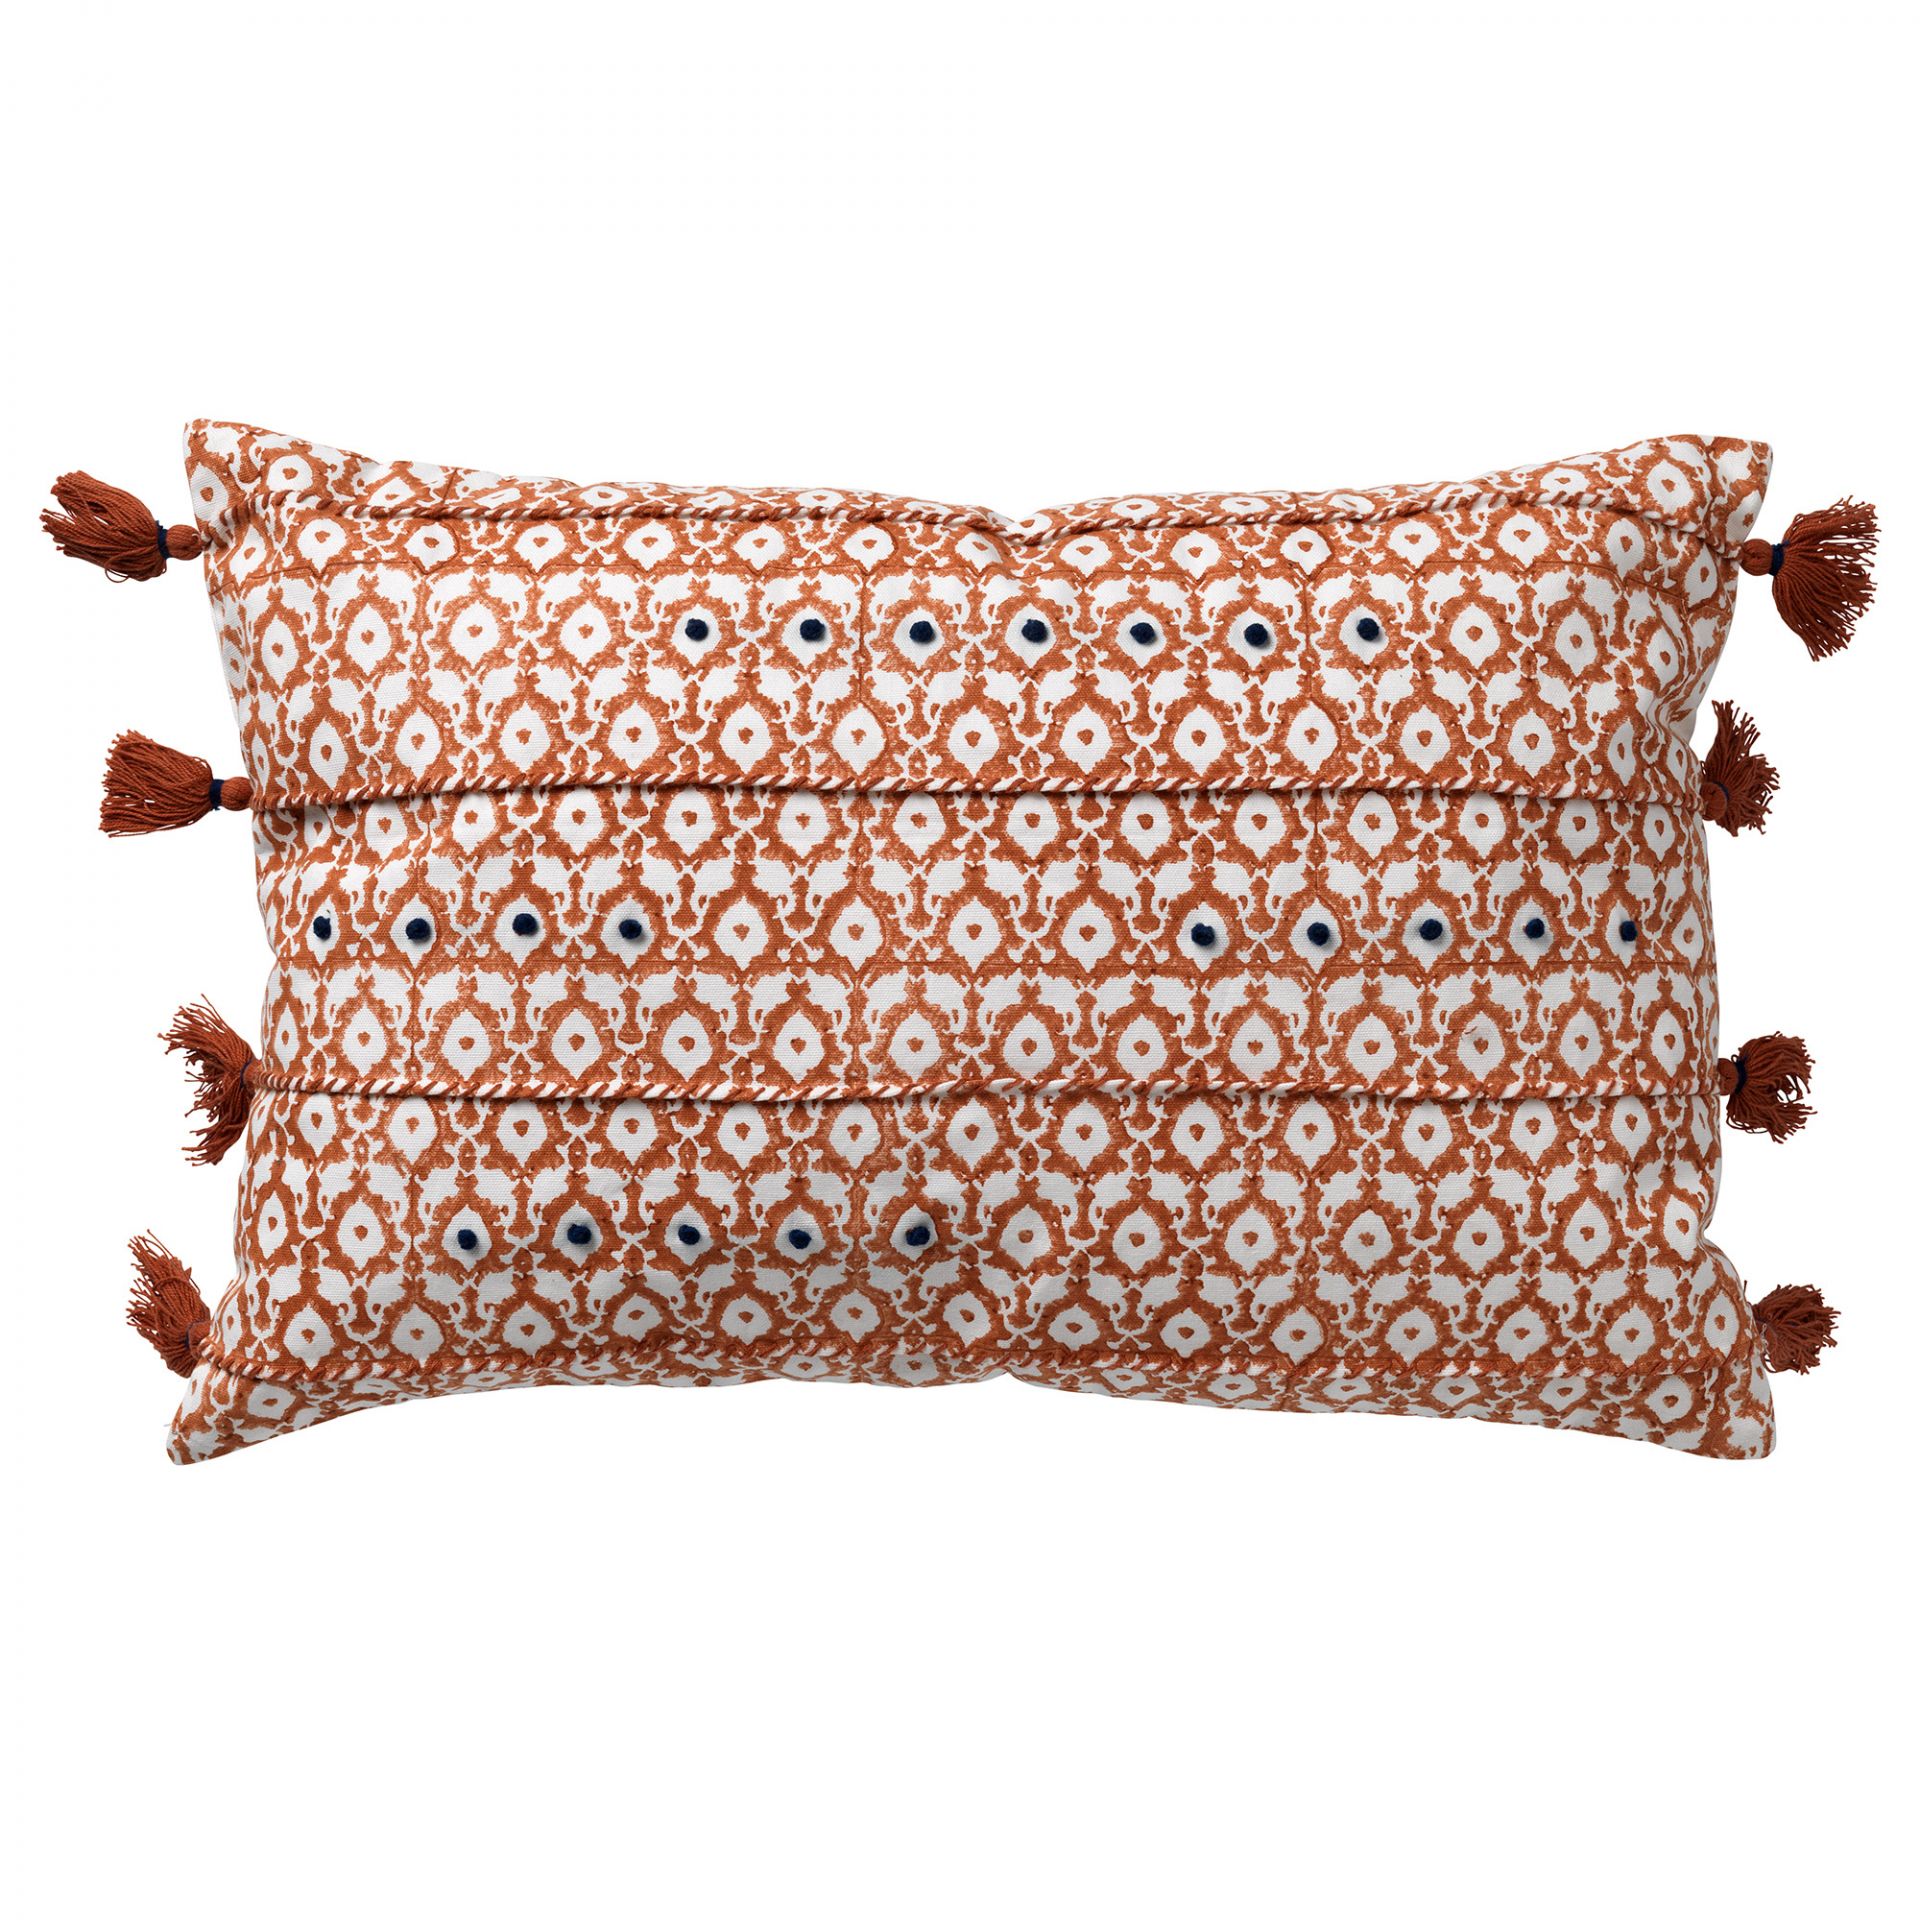 TEQUILA - Cushion cover cotton 40x60 cm Potters Clay - orange